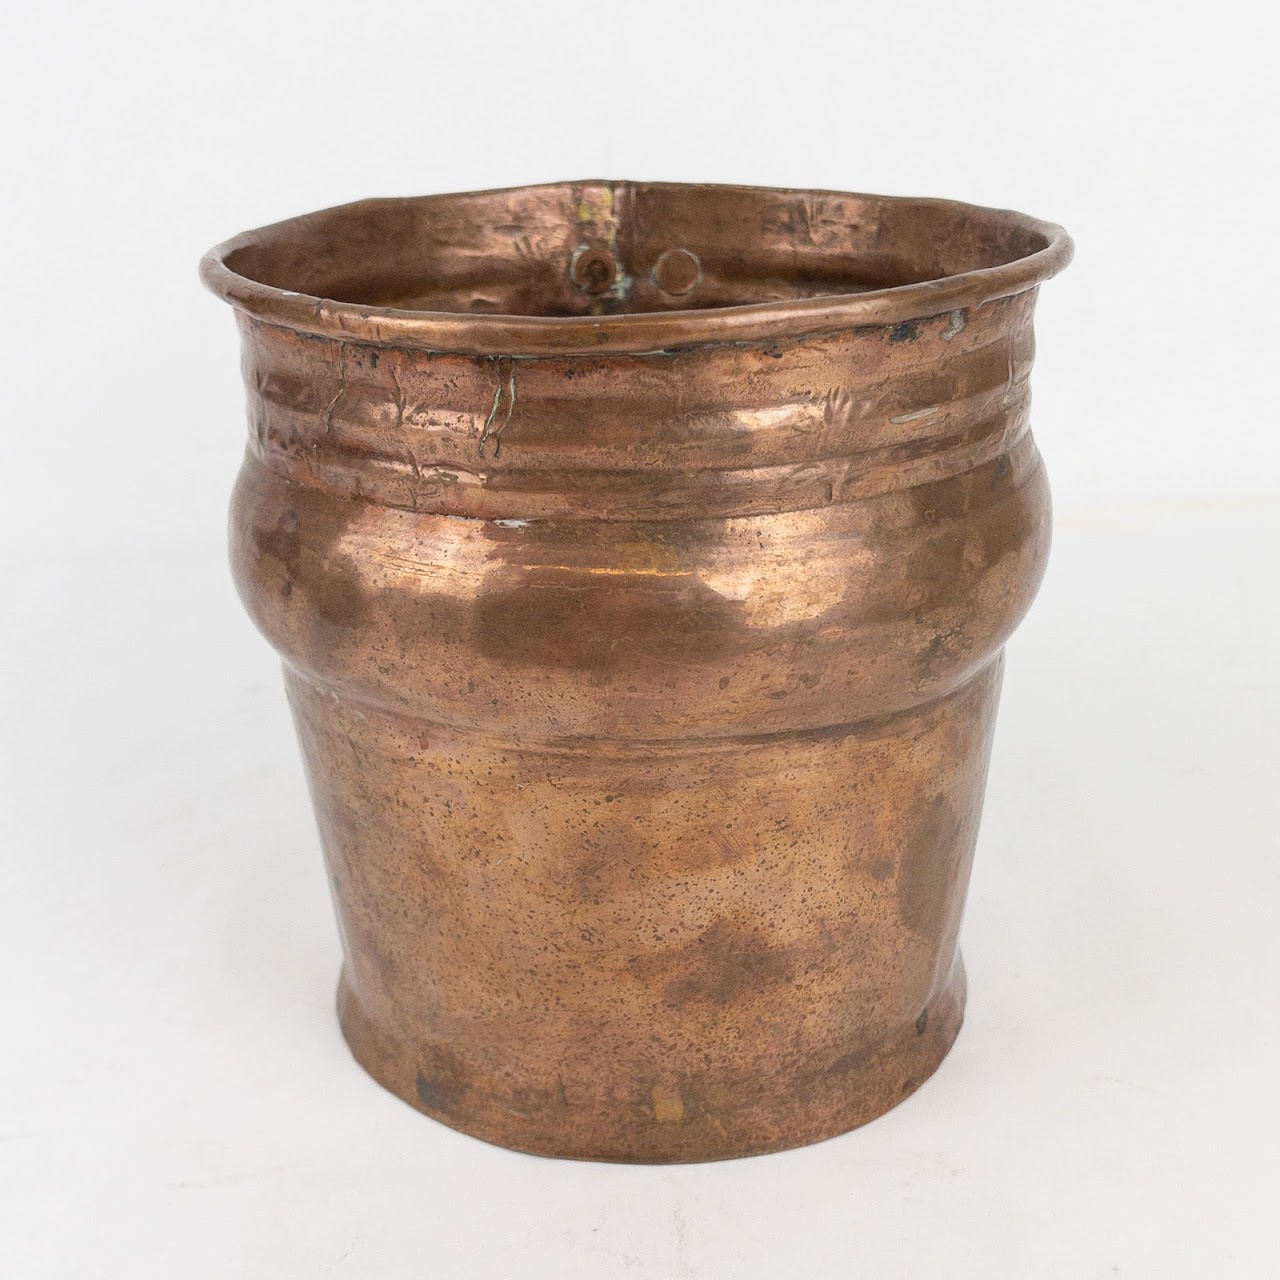 National Copper Collection Oversized Copper Mug